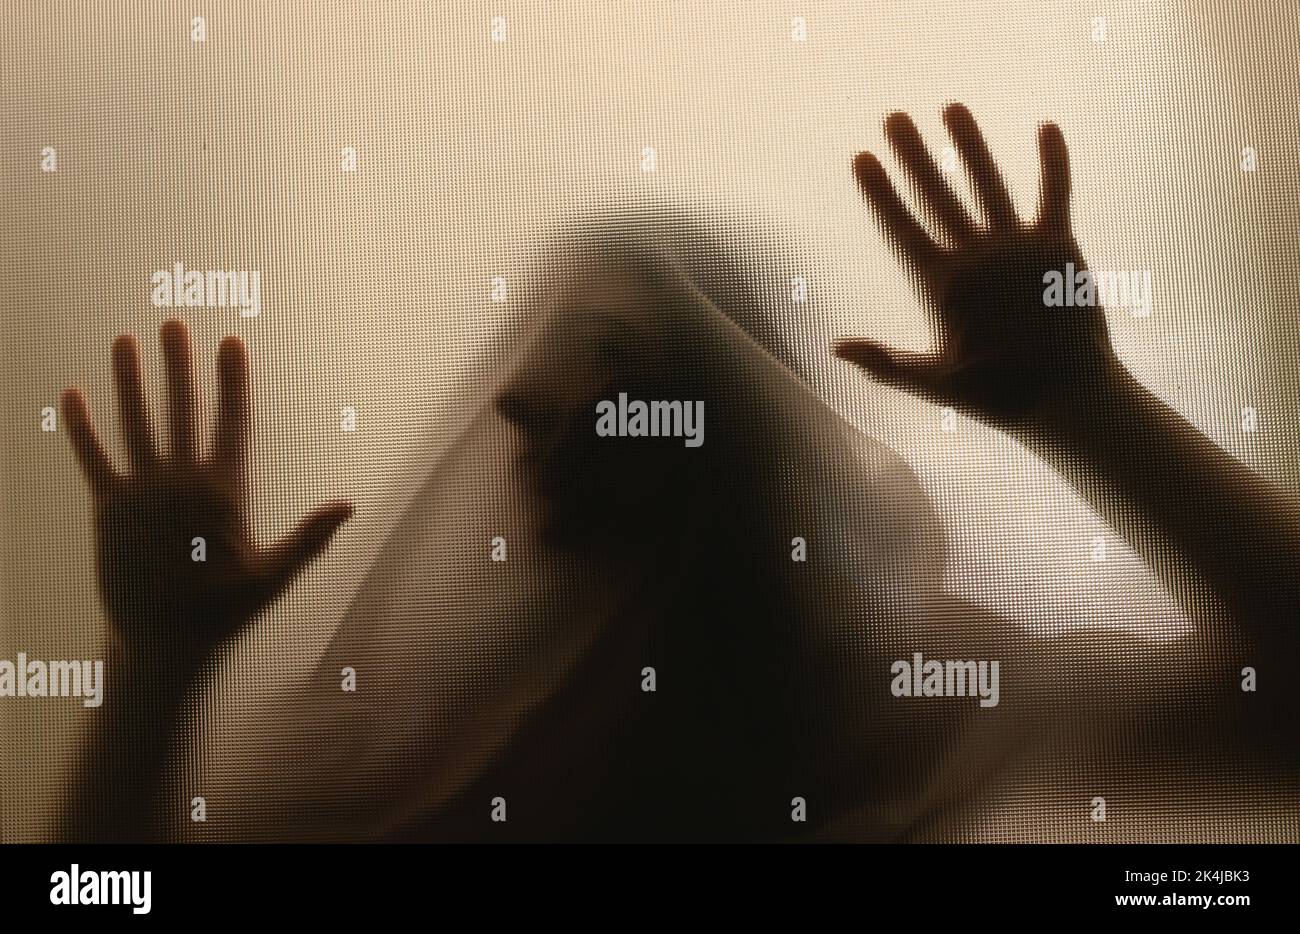 Horror ghost woman behind the matte glass. Halloween festival concept. Stock Photo